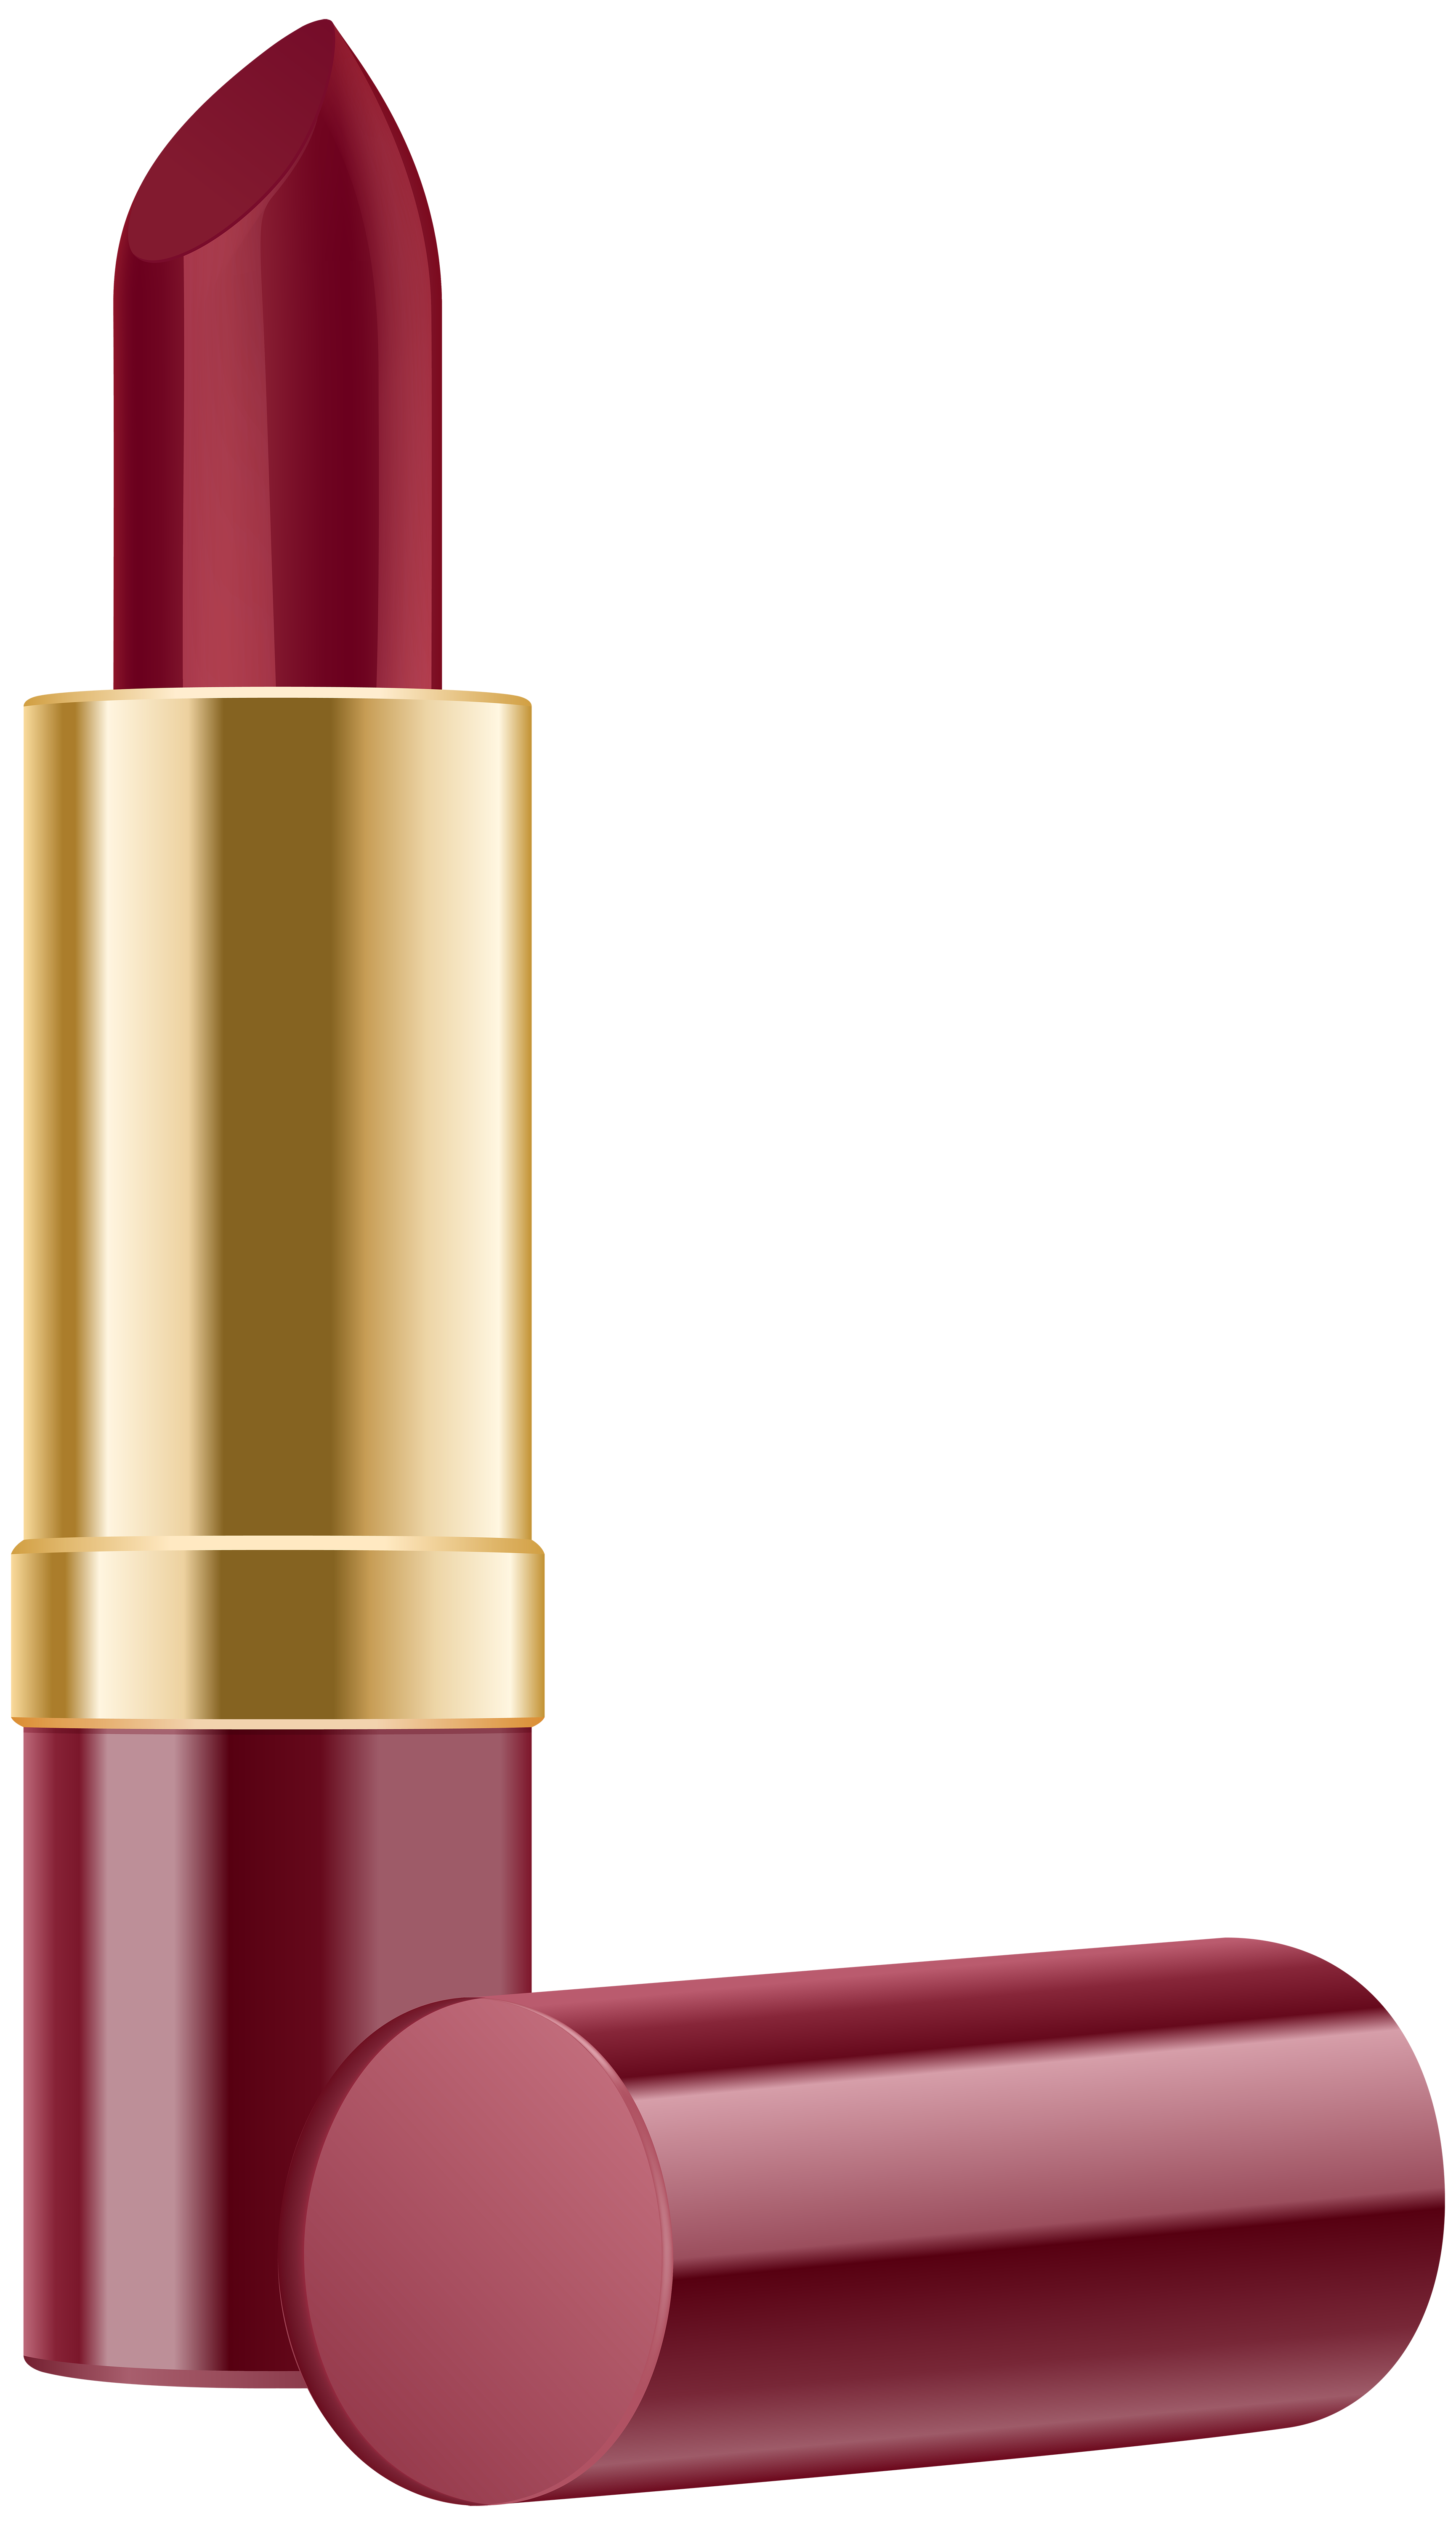 Red Lipstick PNG Clip Art Image